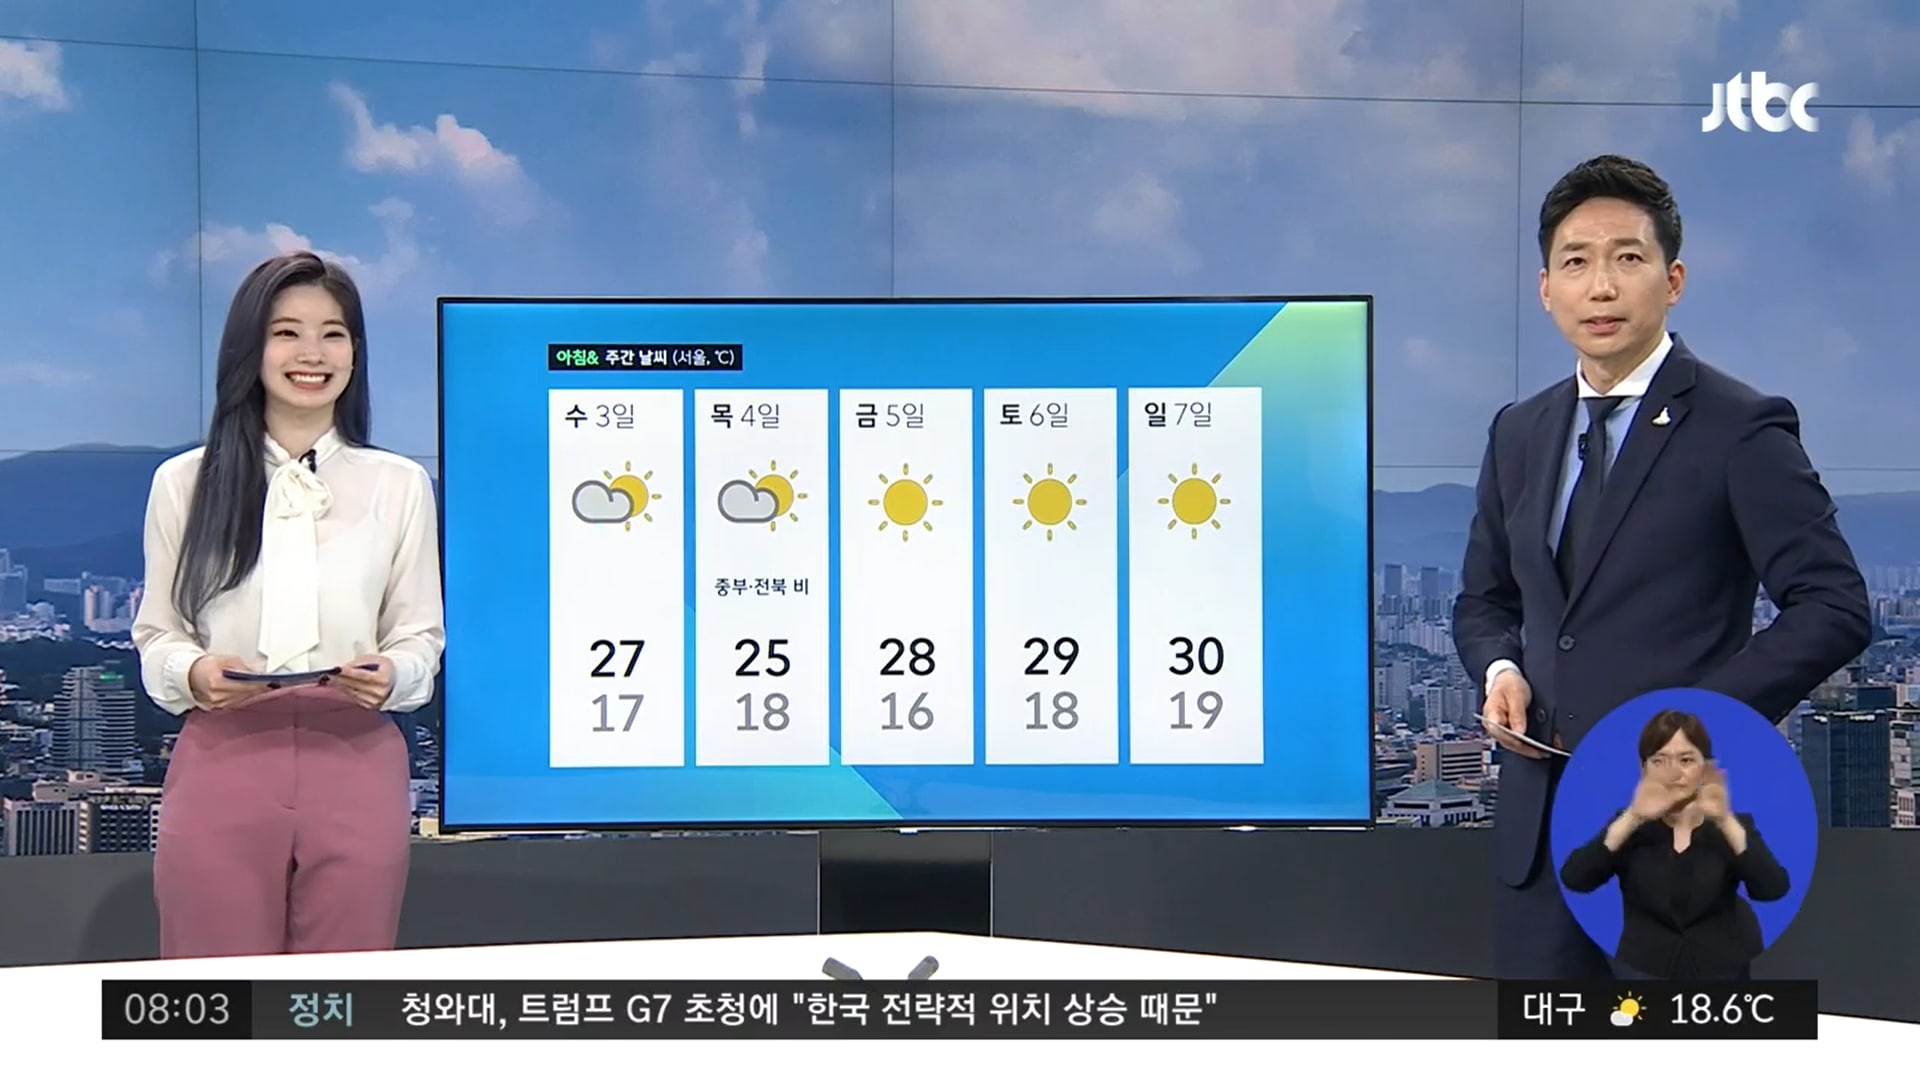 twice-dahyun-suddenly-appears-as-weathercaster-on-morning-news-2